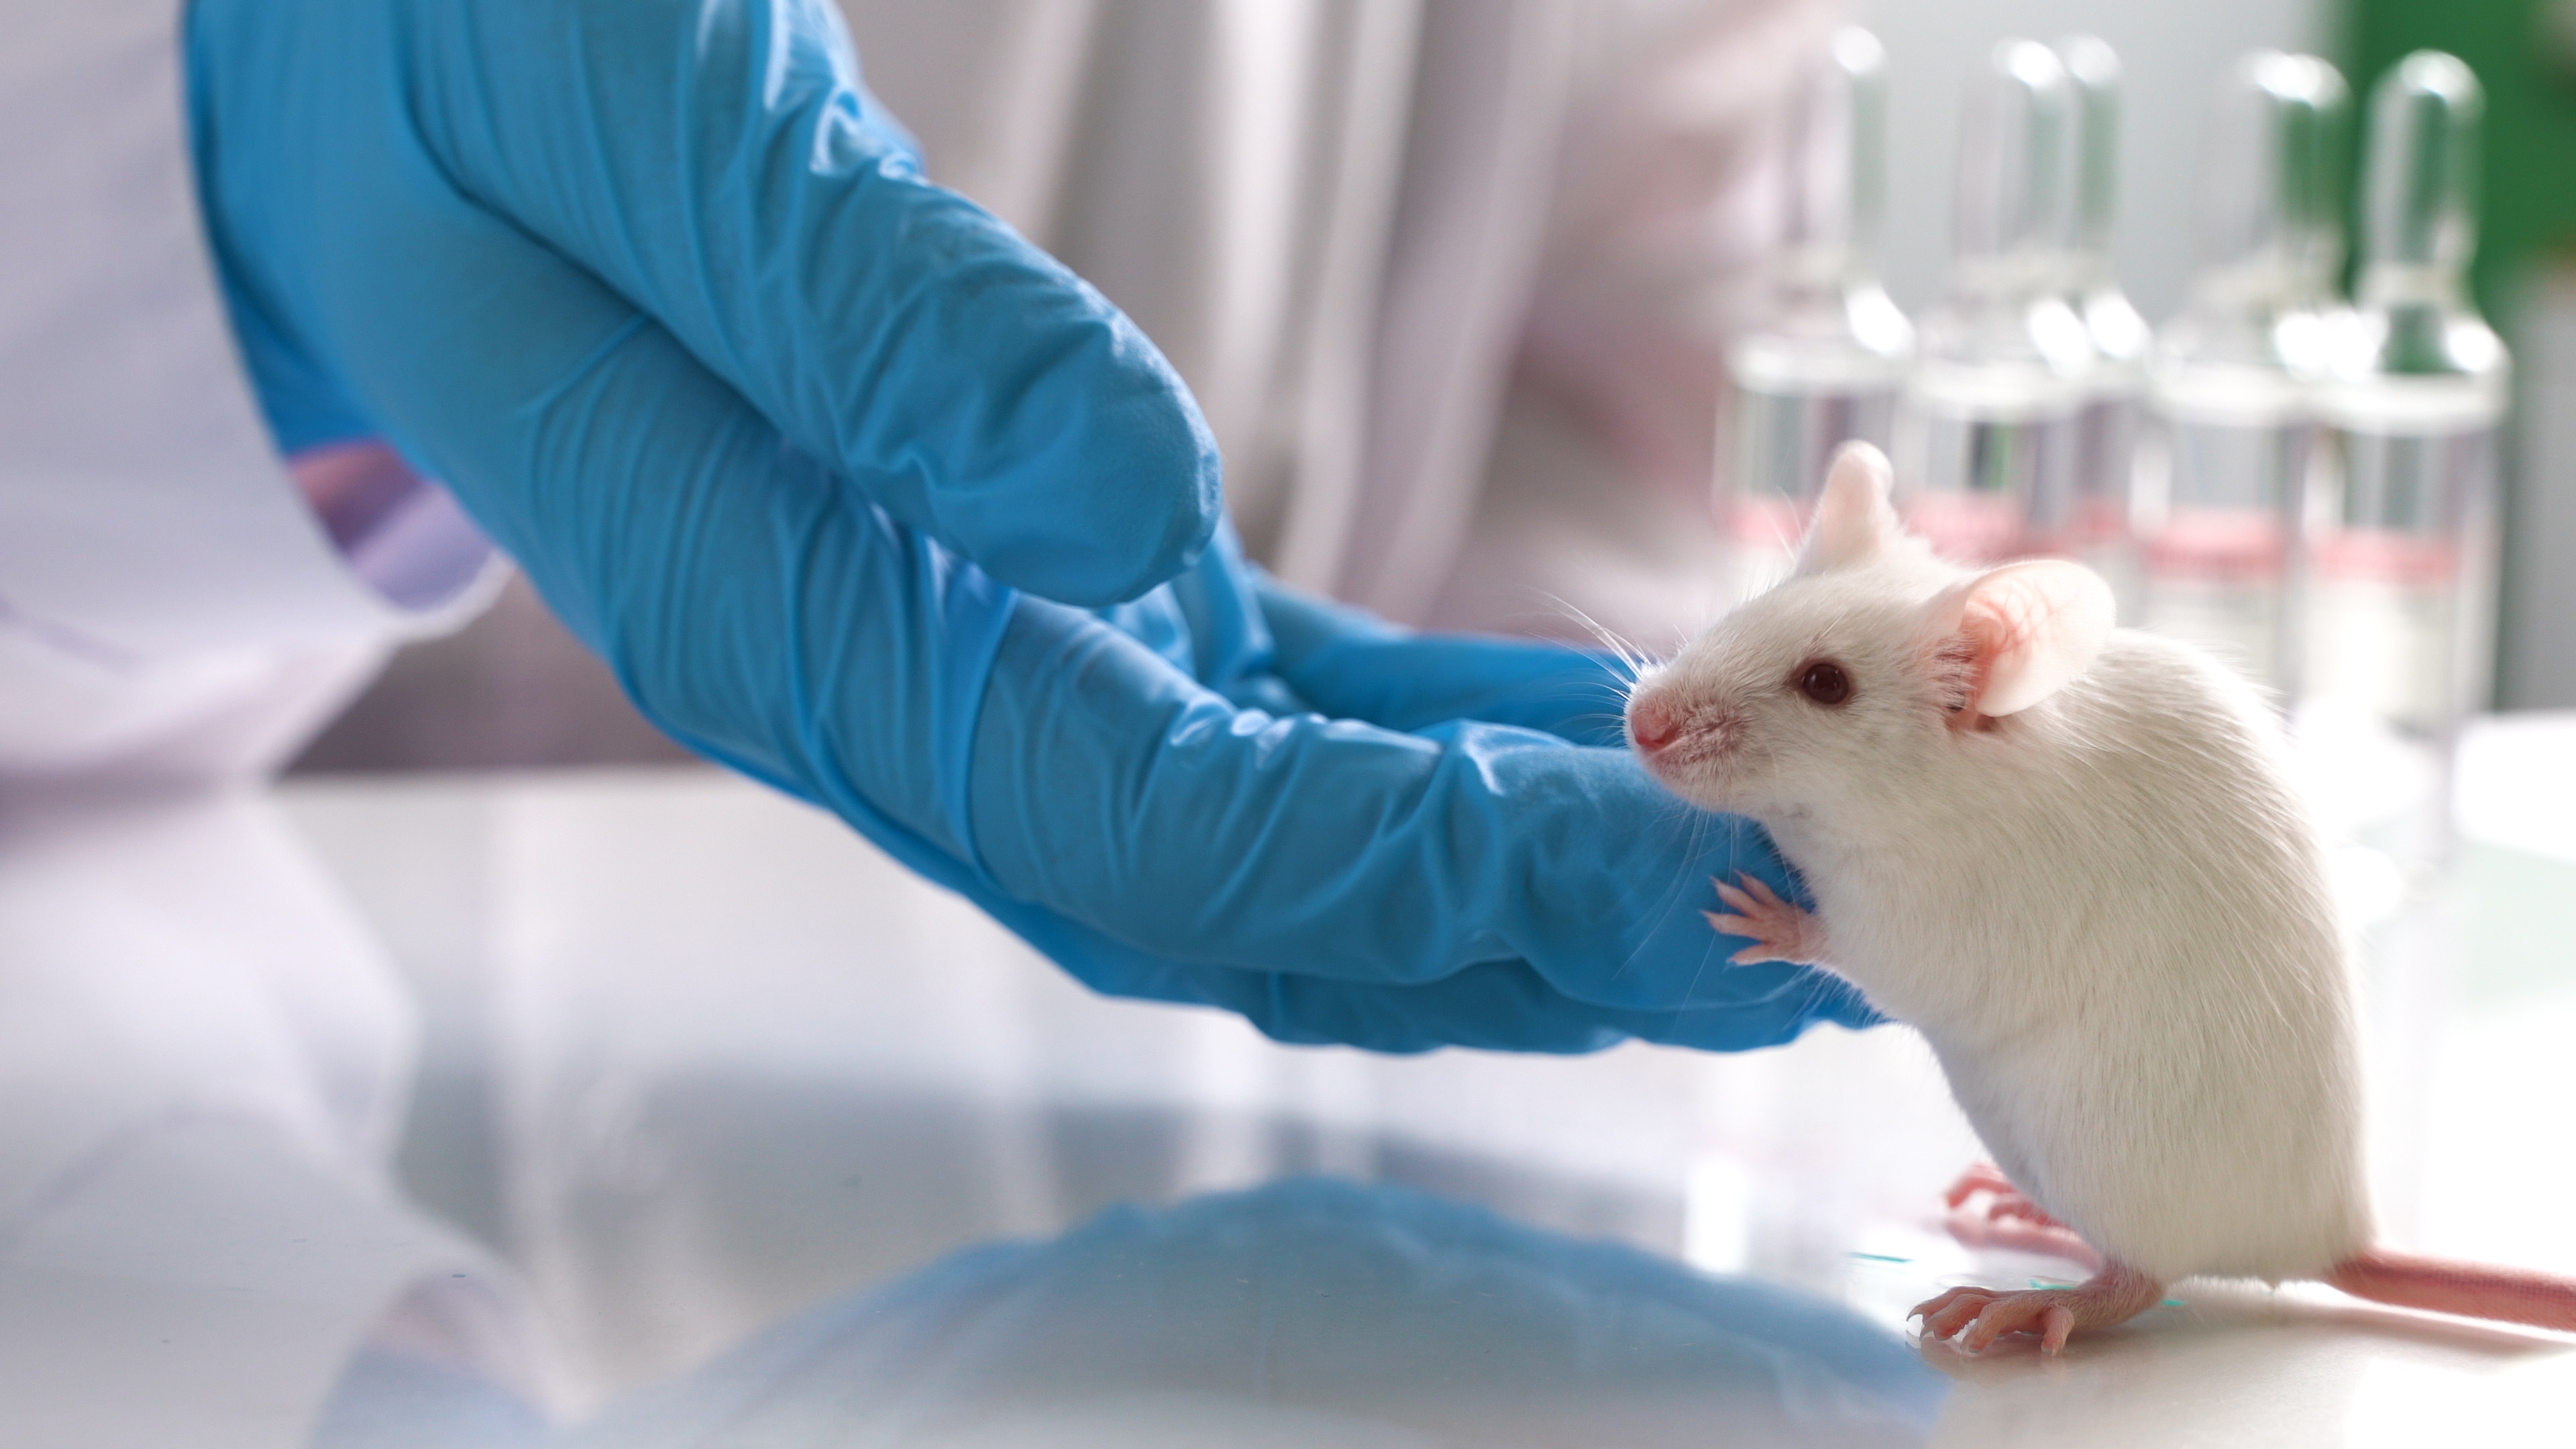 A team of researchers based in China and the US say rat forebrain tissues that grew within the adult mice in their experiment “were structurally and functionally intact”. Photo: Shutterstock